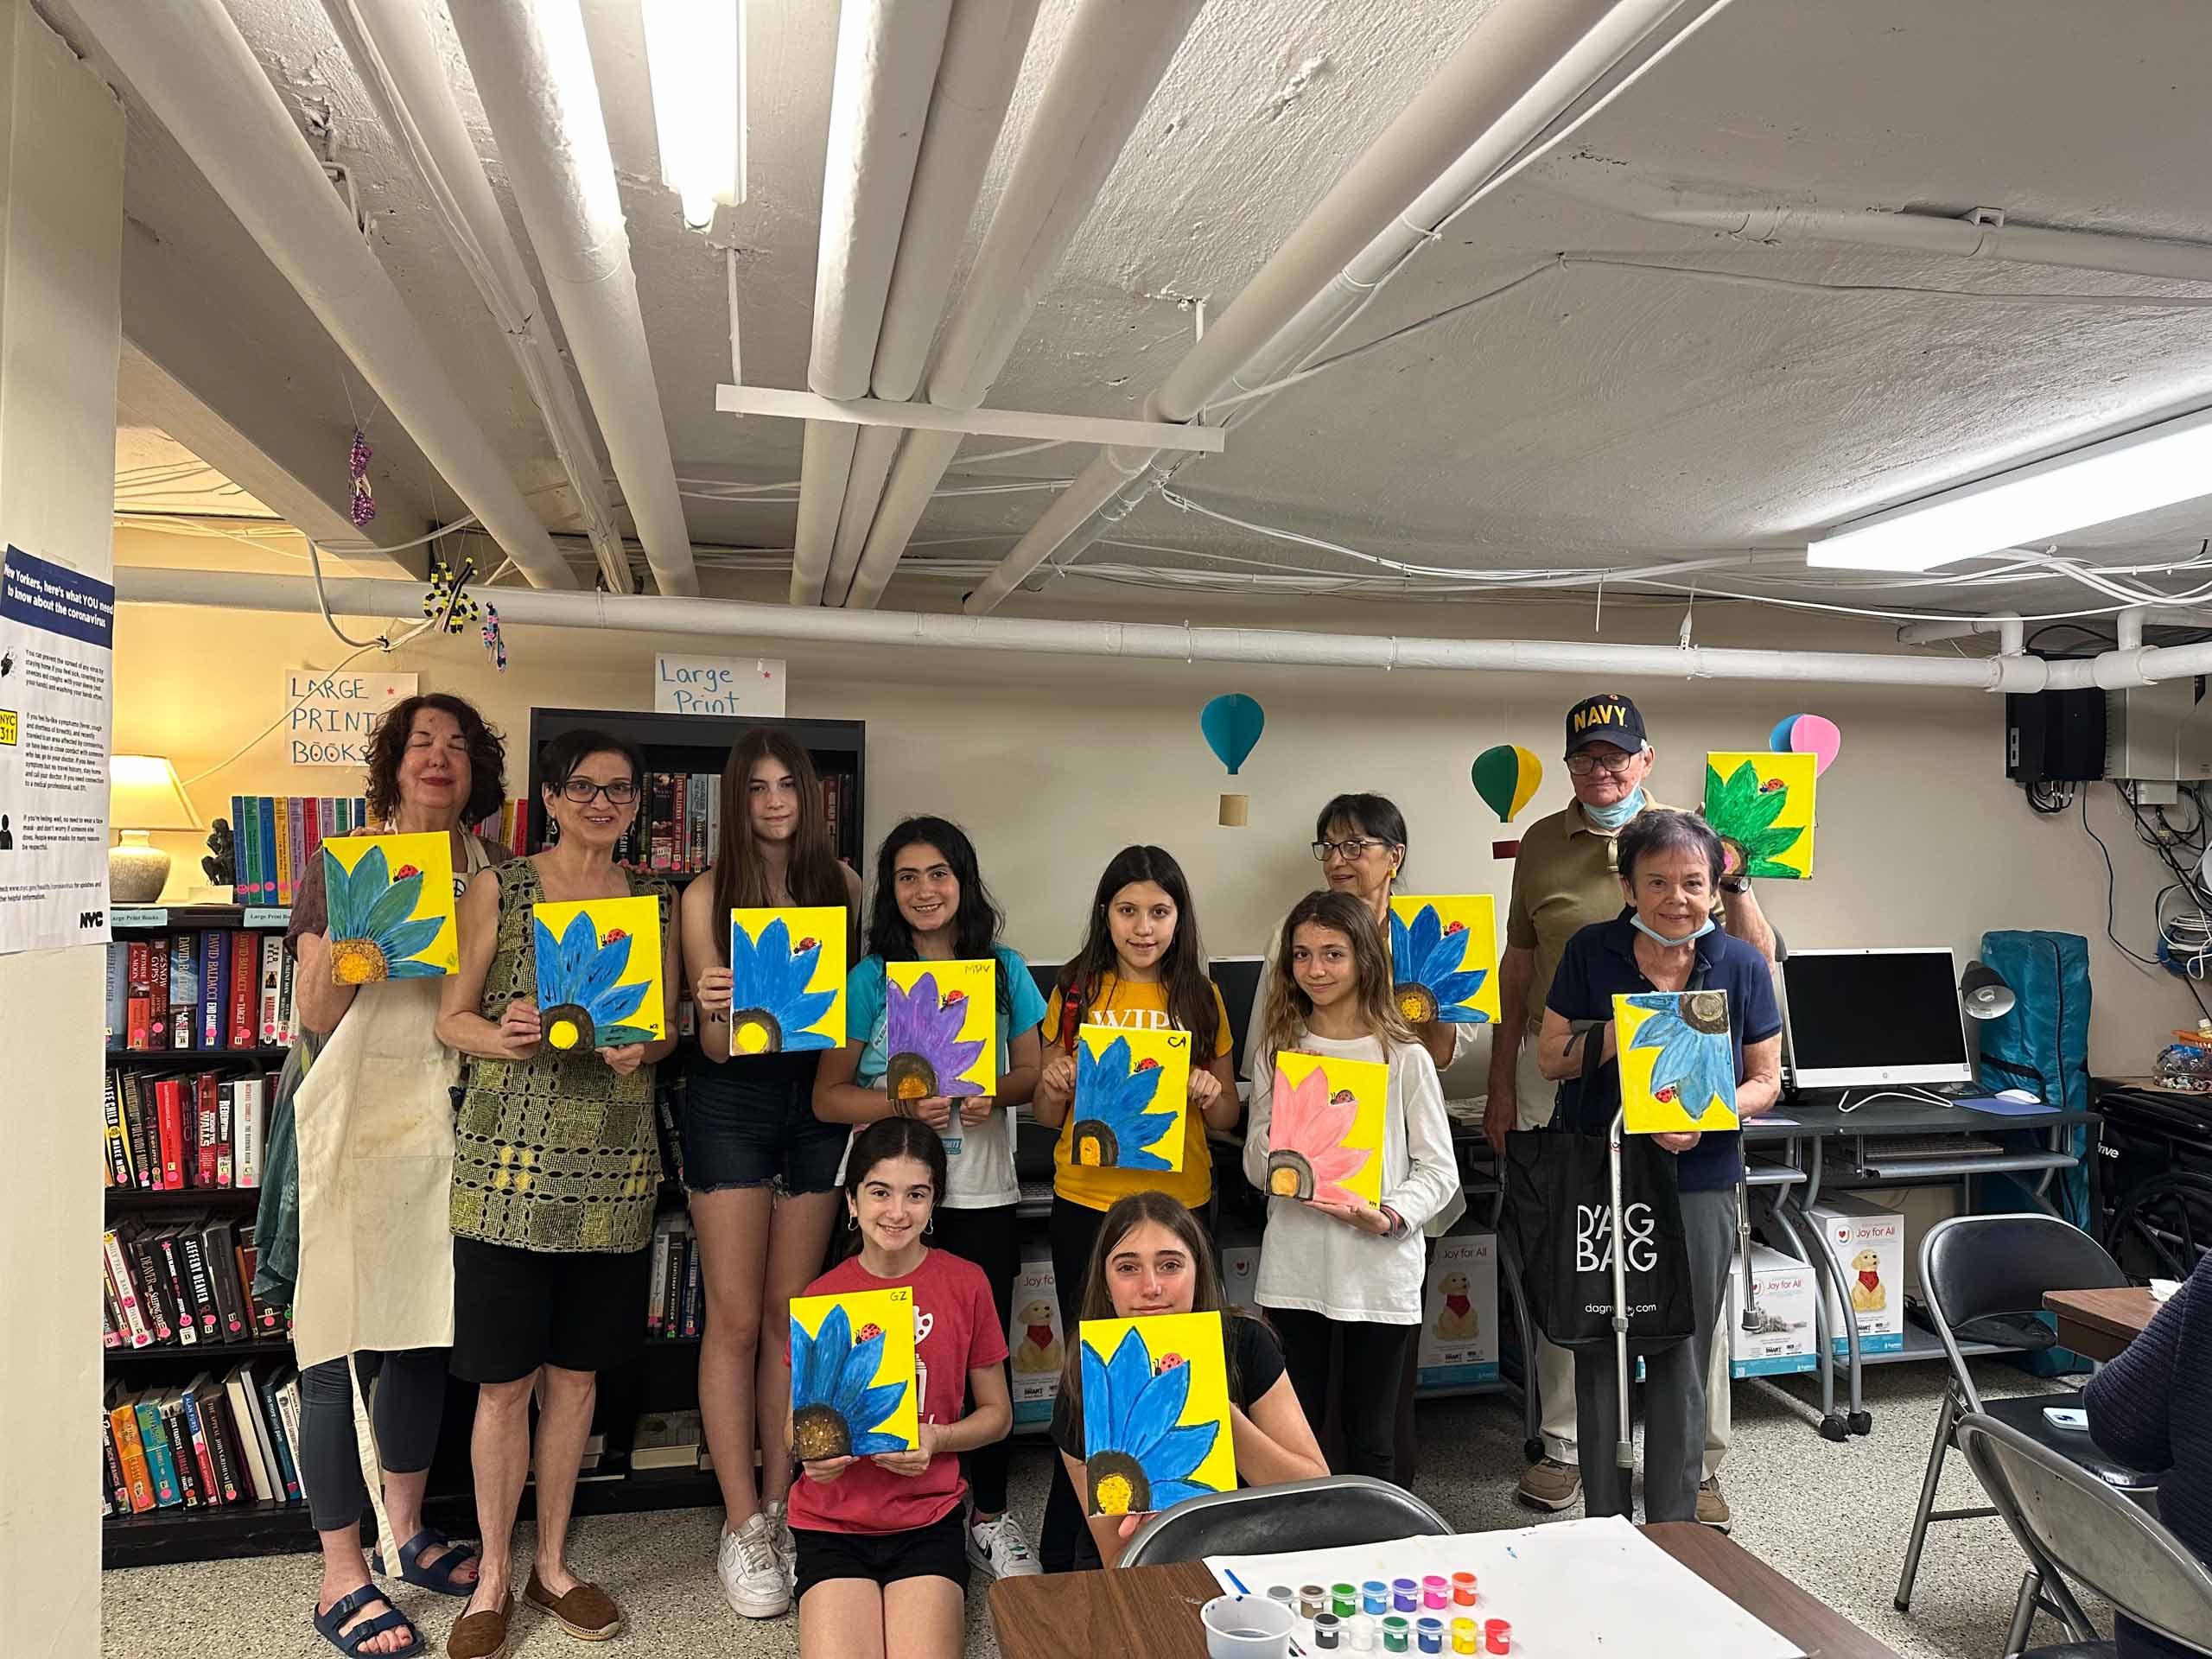 A group of people holding up colorful paintings in a room.